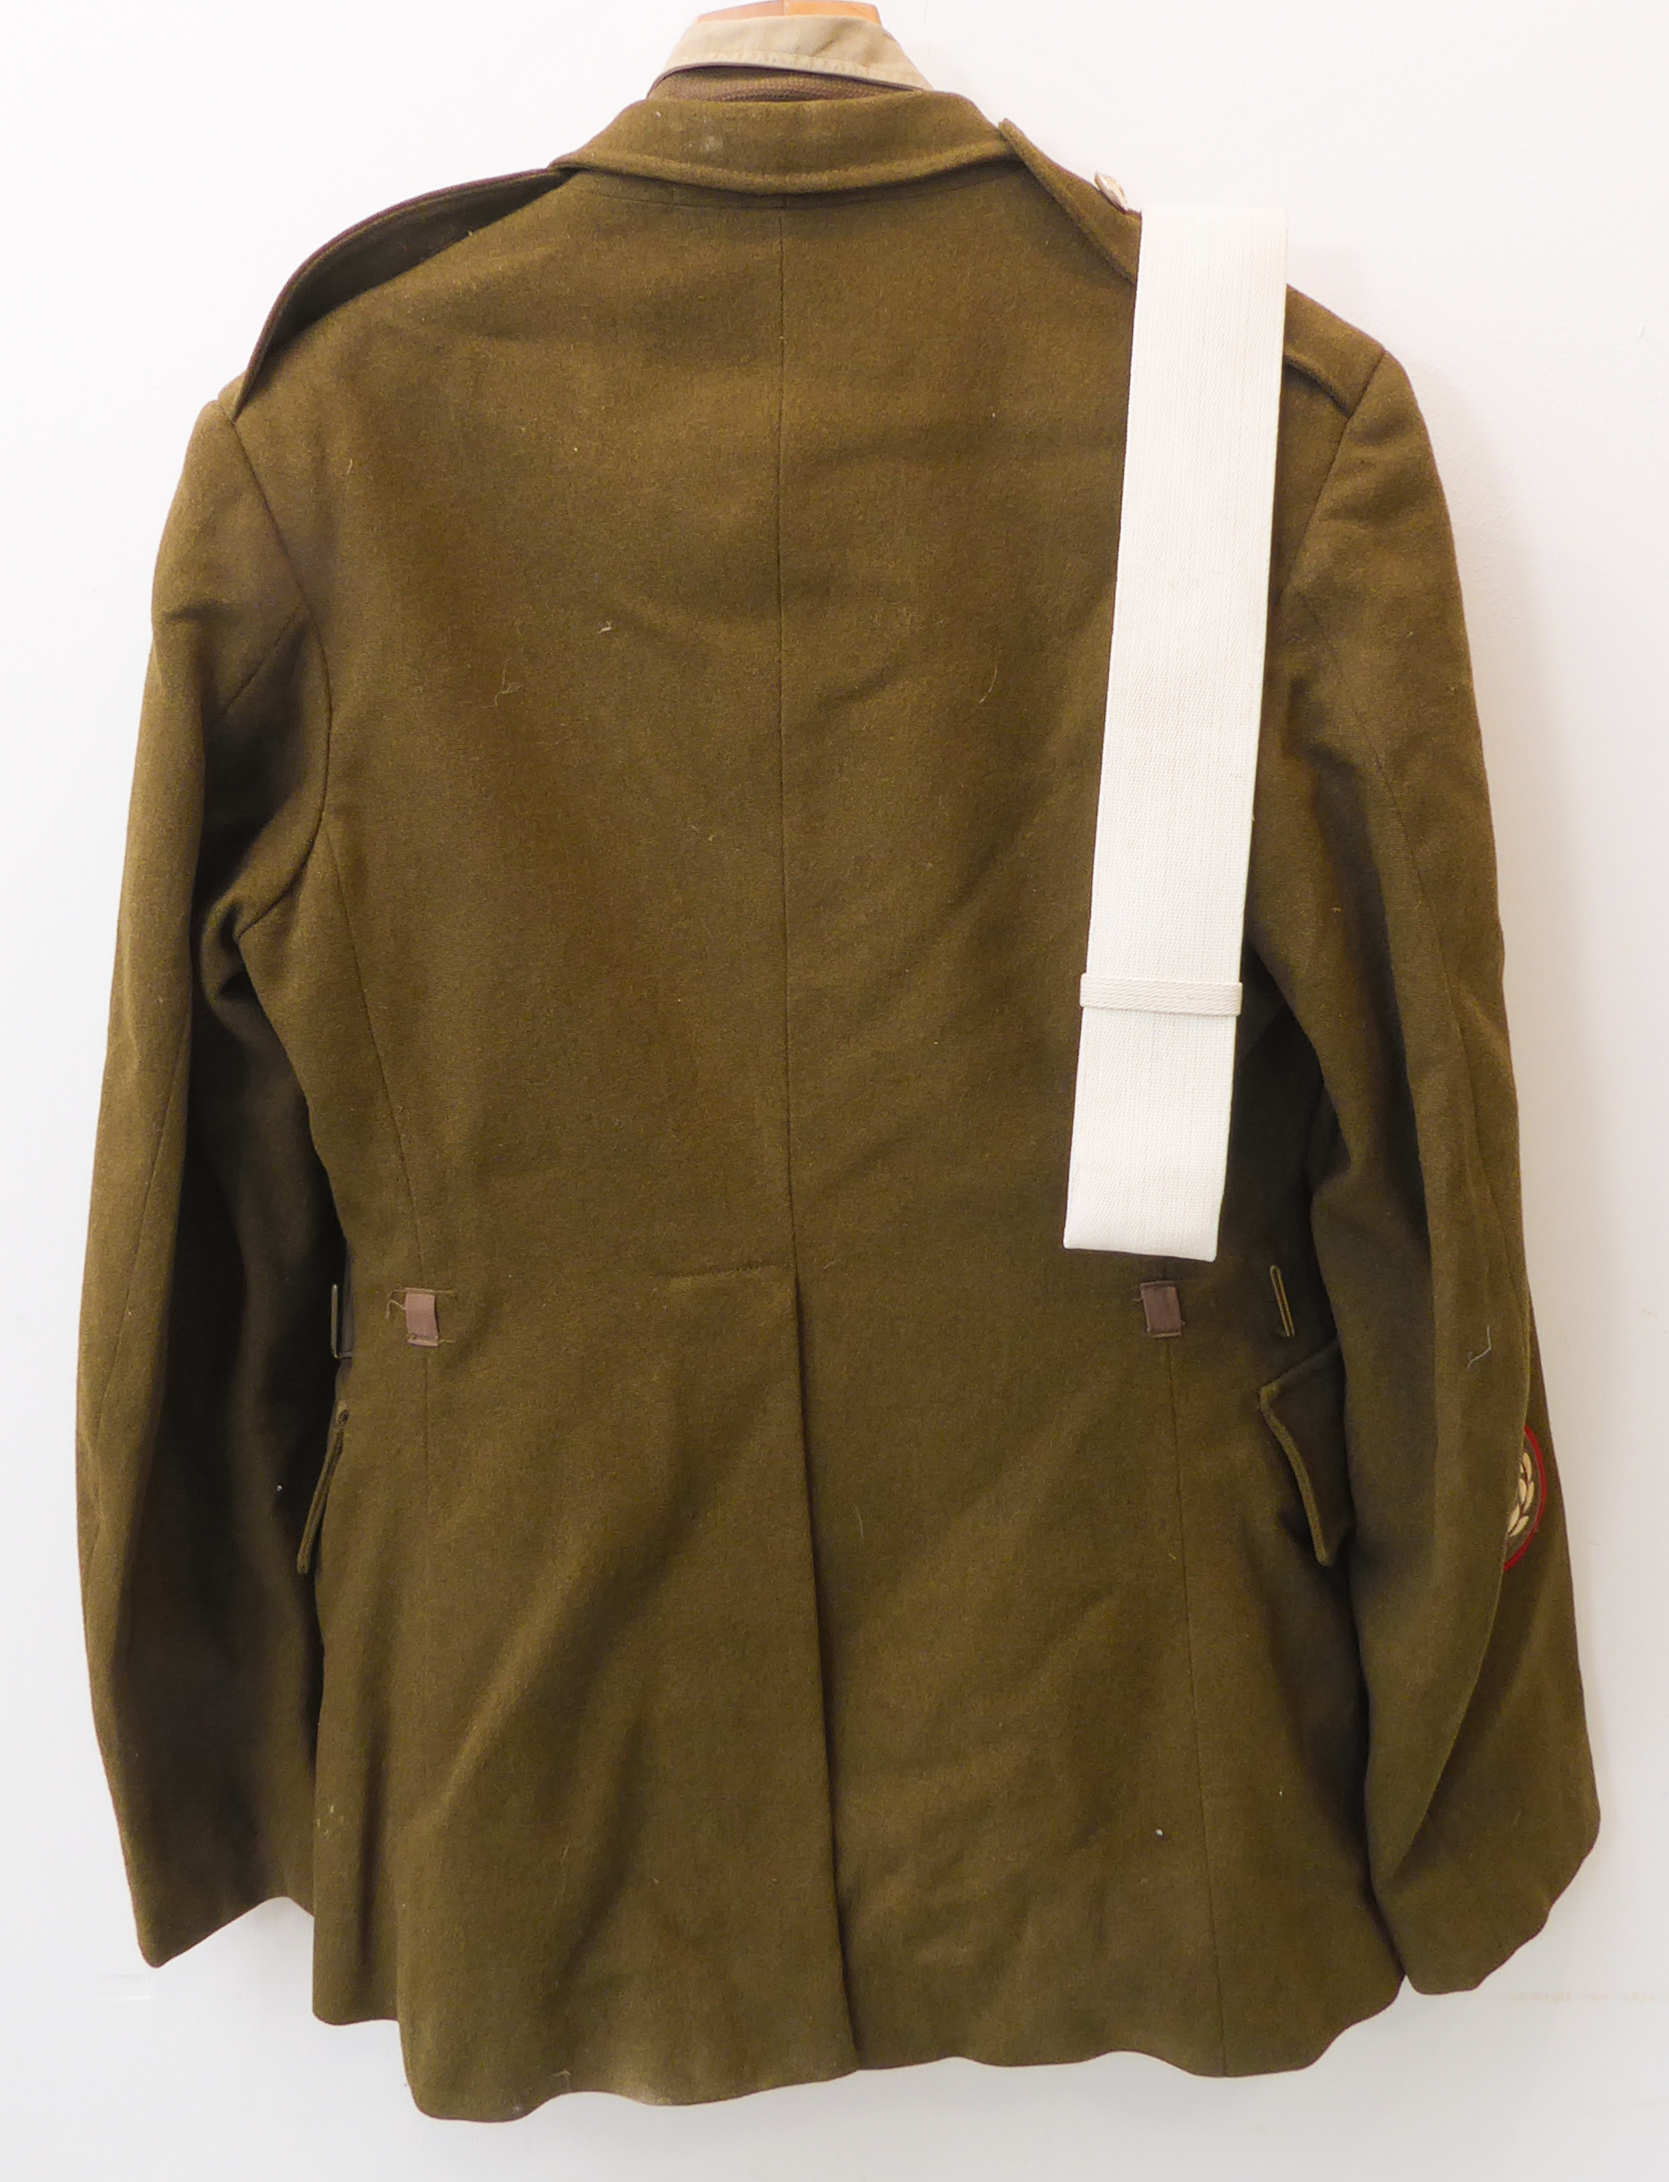 Articles of 1960s British Army uniform: a No. 2 Dress tunic, trousers and tunic-belt (missing - Image 3 of 12